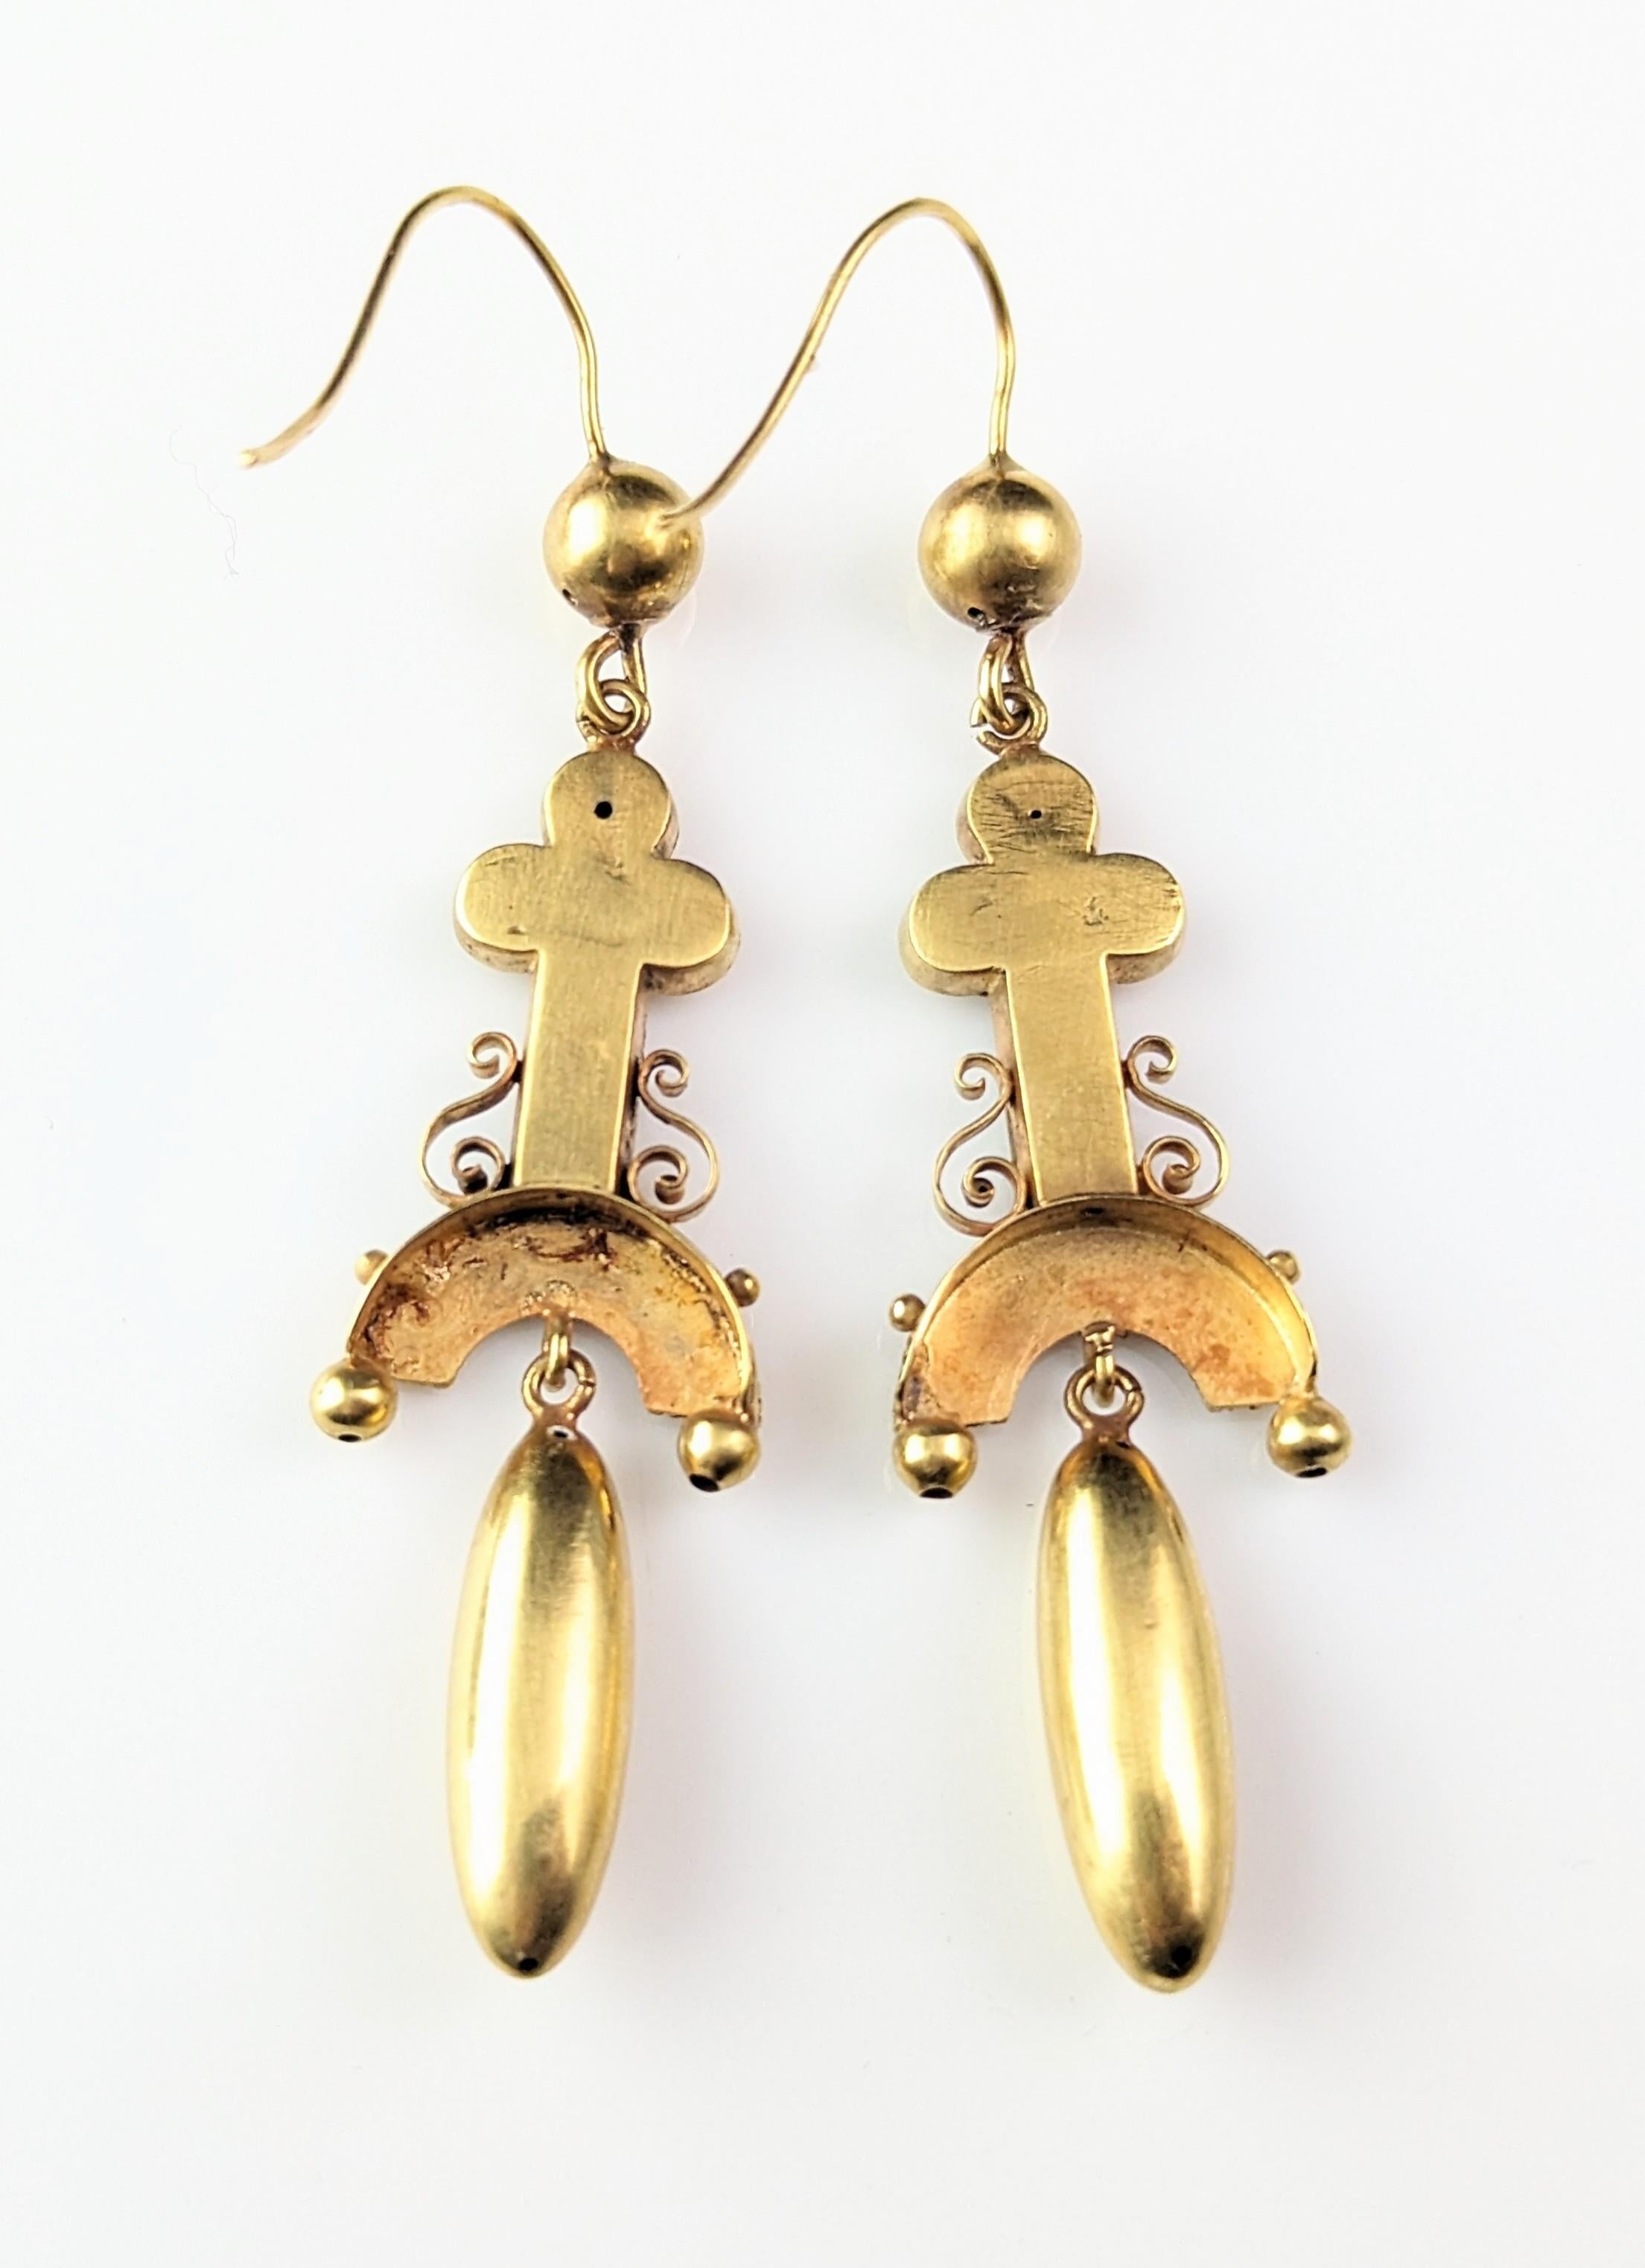 Antique Etruscan revival earrings, 15k yellow gold  For Sale 5